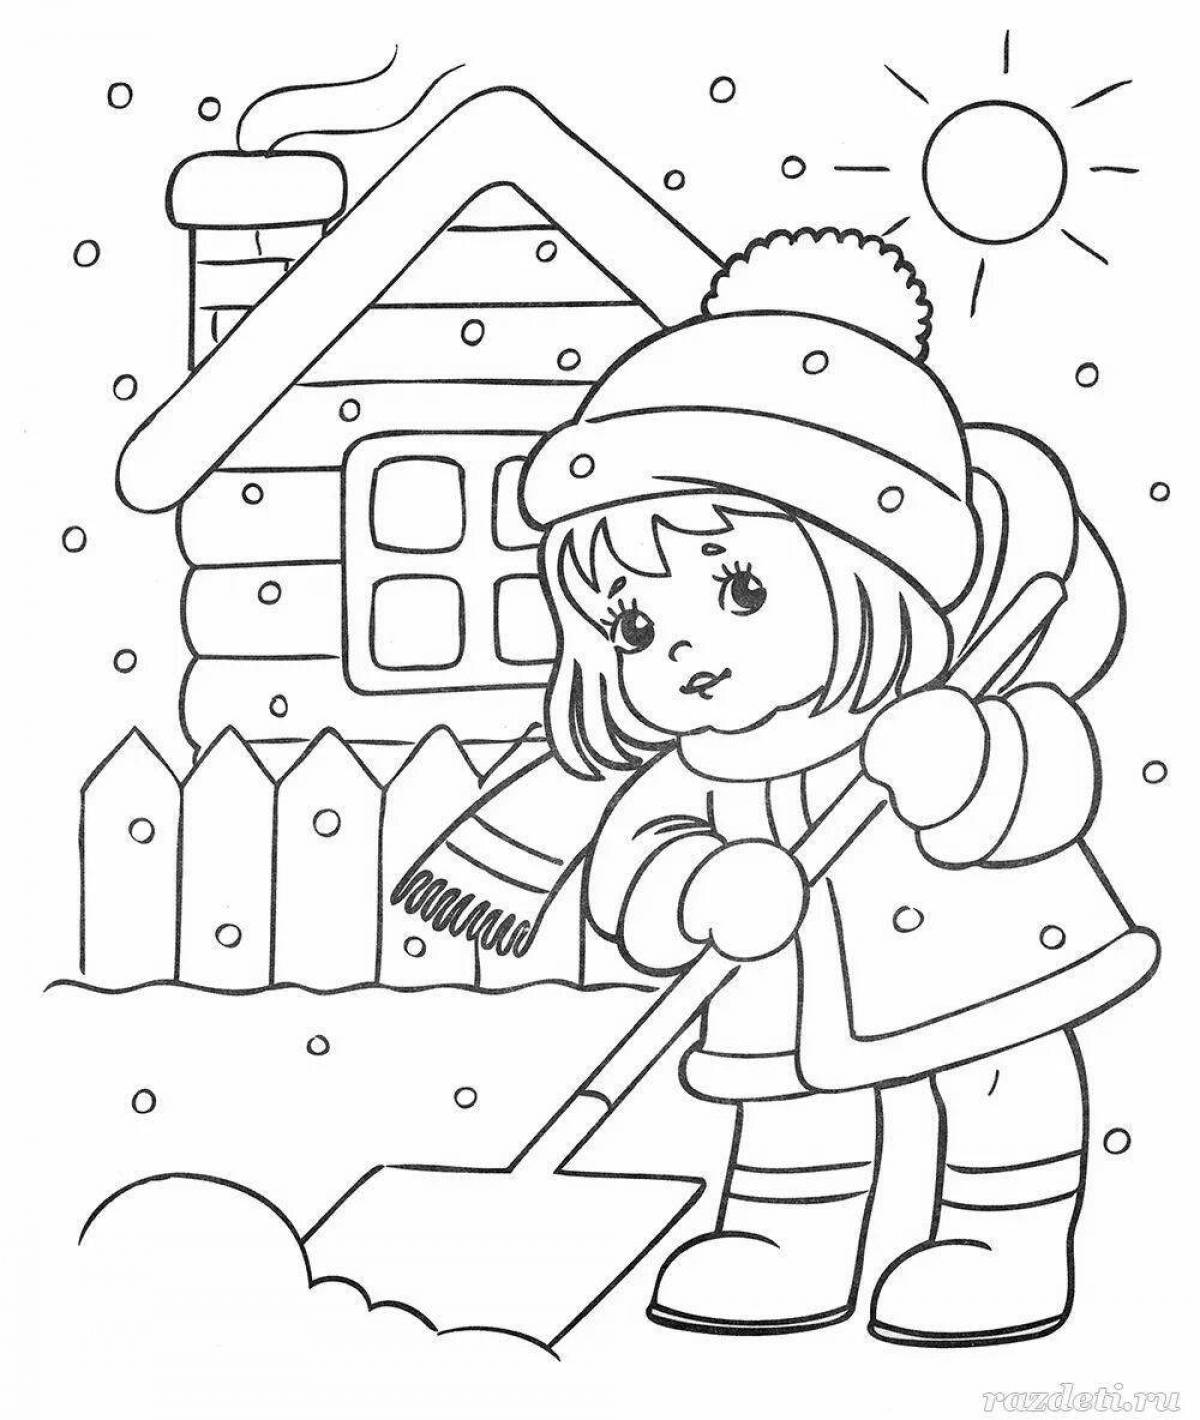 Fantastic coloring book for children 3 years old winter